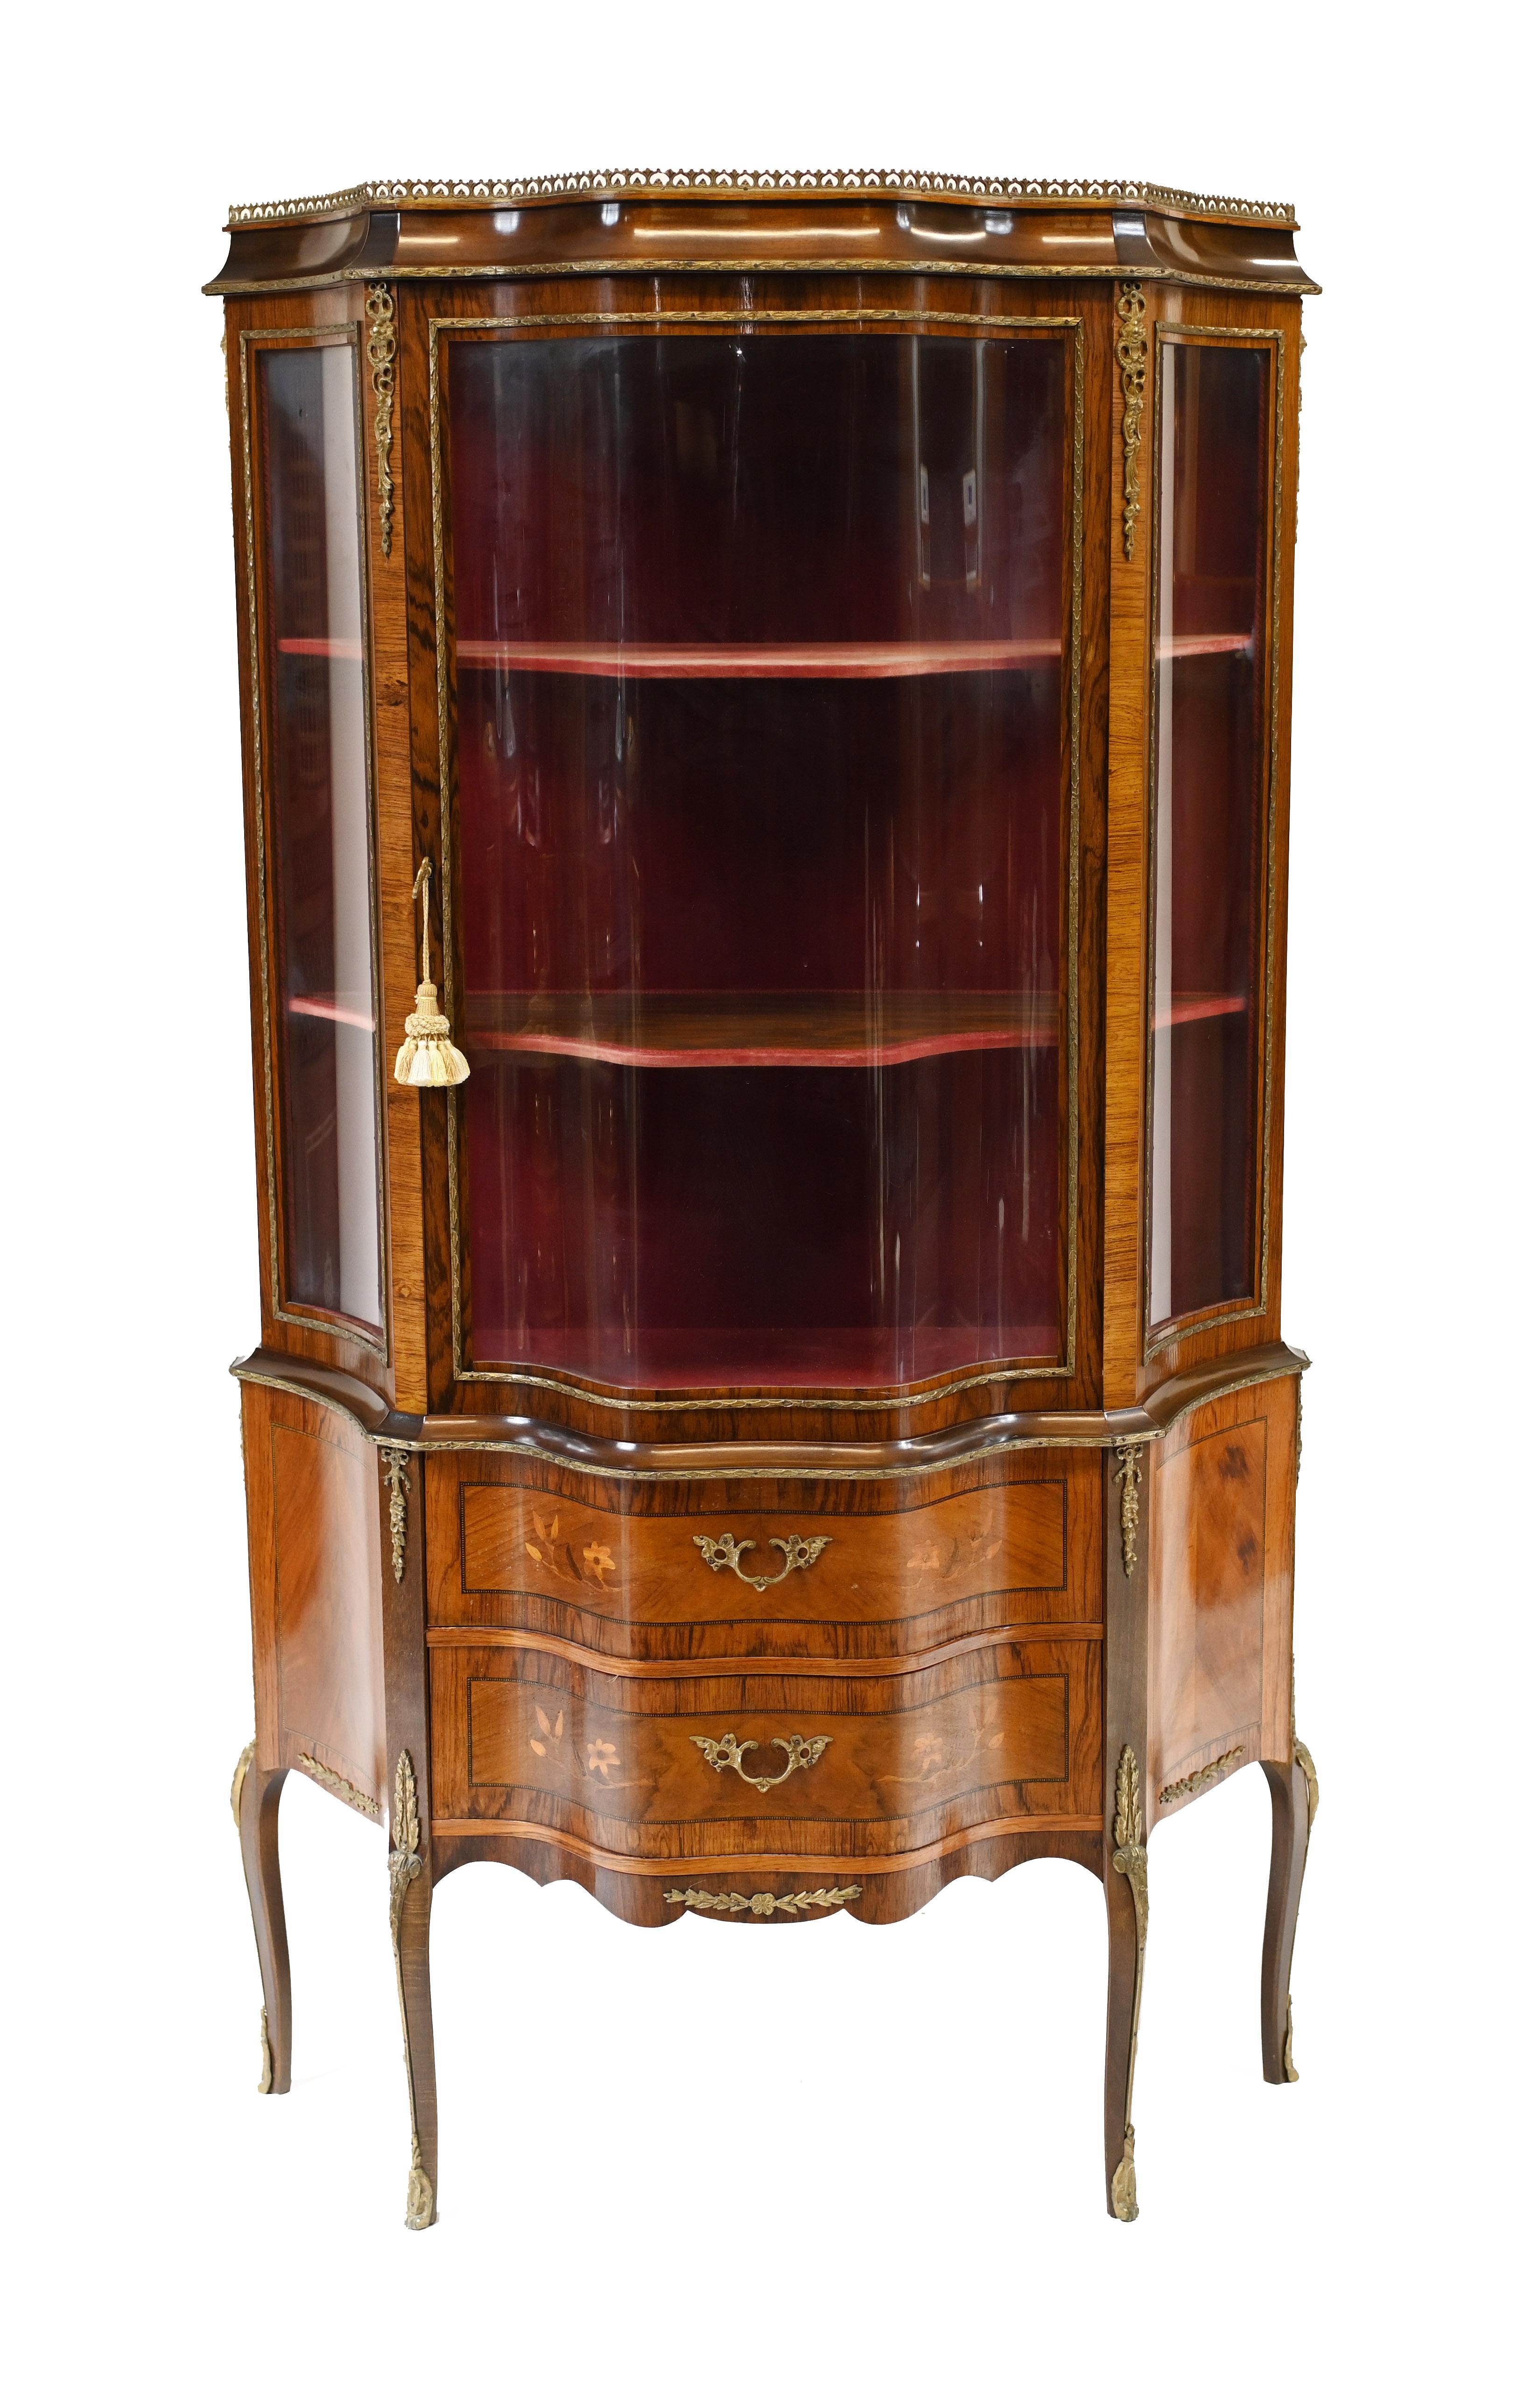 Elegant antique French vitrine on cabriole legs
Features crossbanded drawers and sides
Circa 1880
Great china cabinet or bijuouterie perfect for displaying decorative pieces
Bought from a dealer at Les Puces antiques market in Paris.





